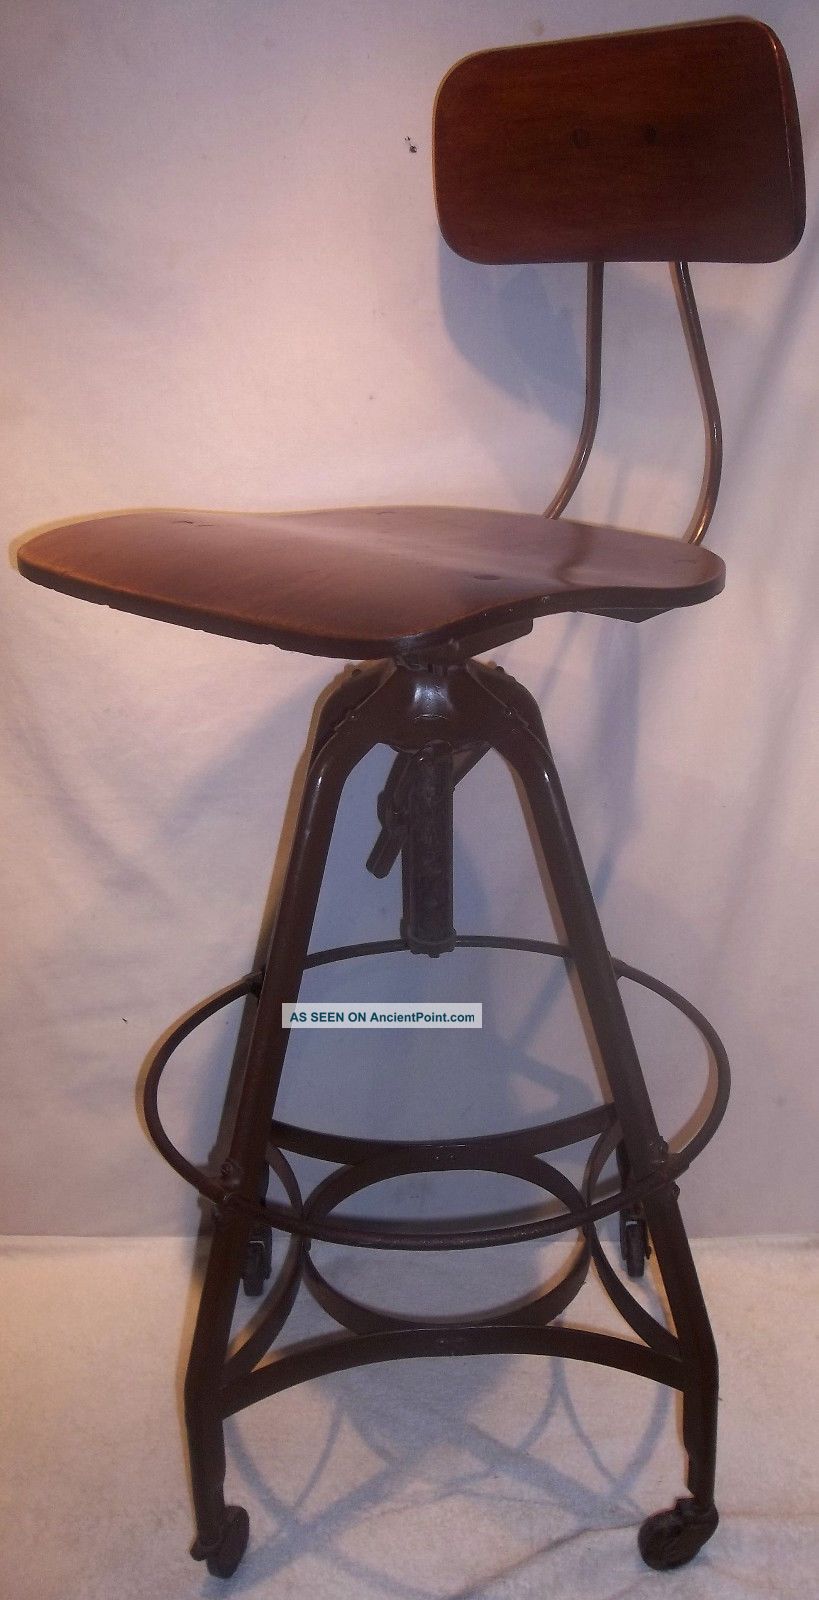 Antique Toledo Uhl Industrial Drafting Stool Chair.  99 Cents 1900-1950 photo